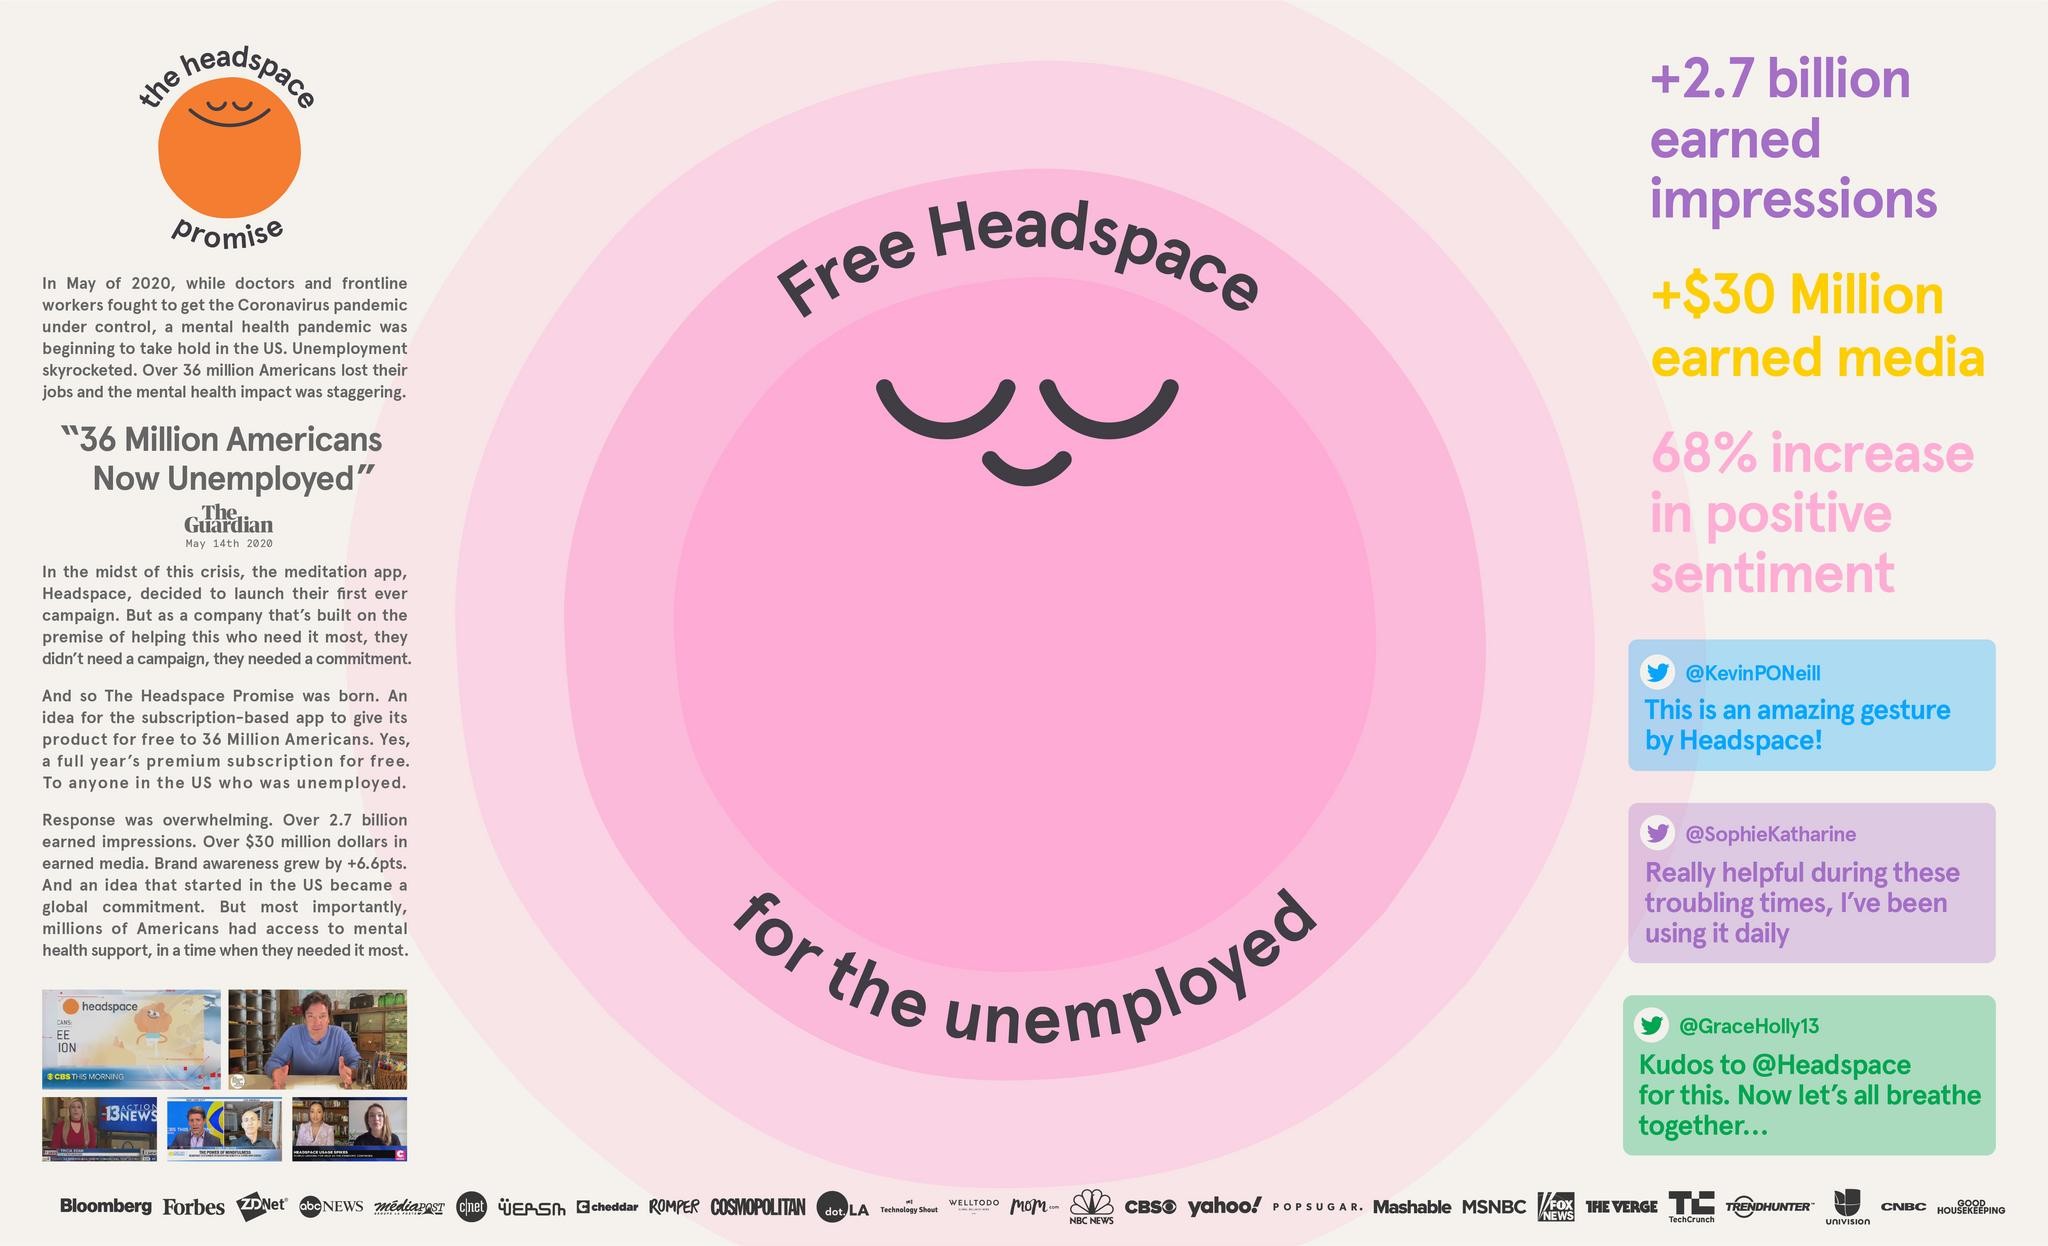 The Headspace Promise